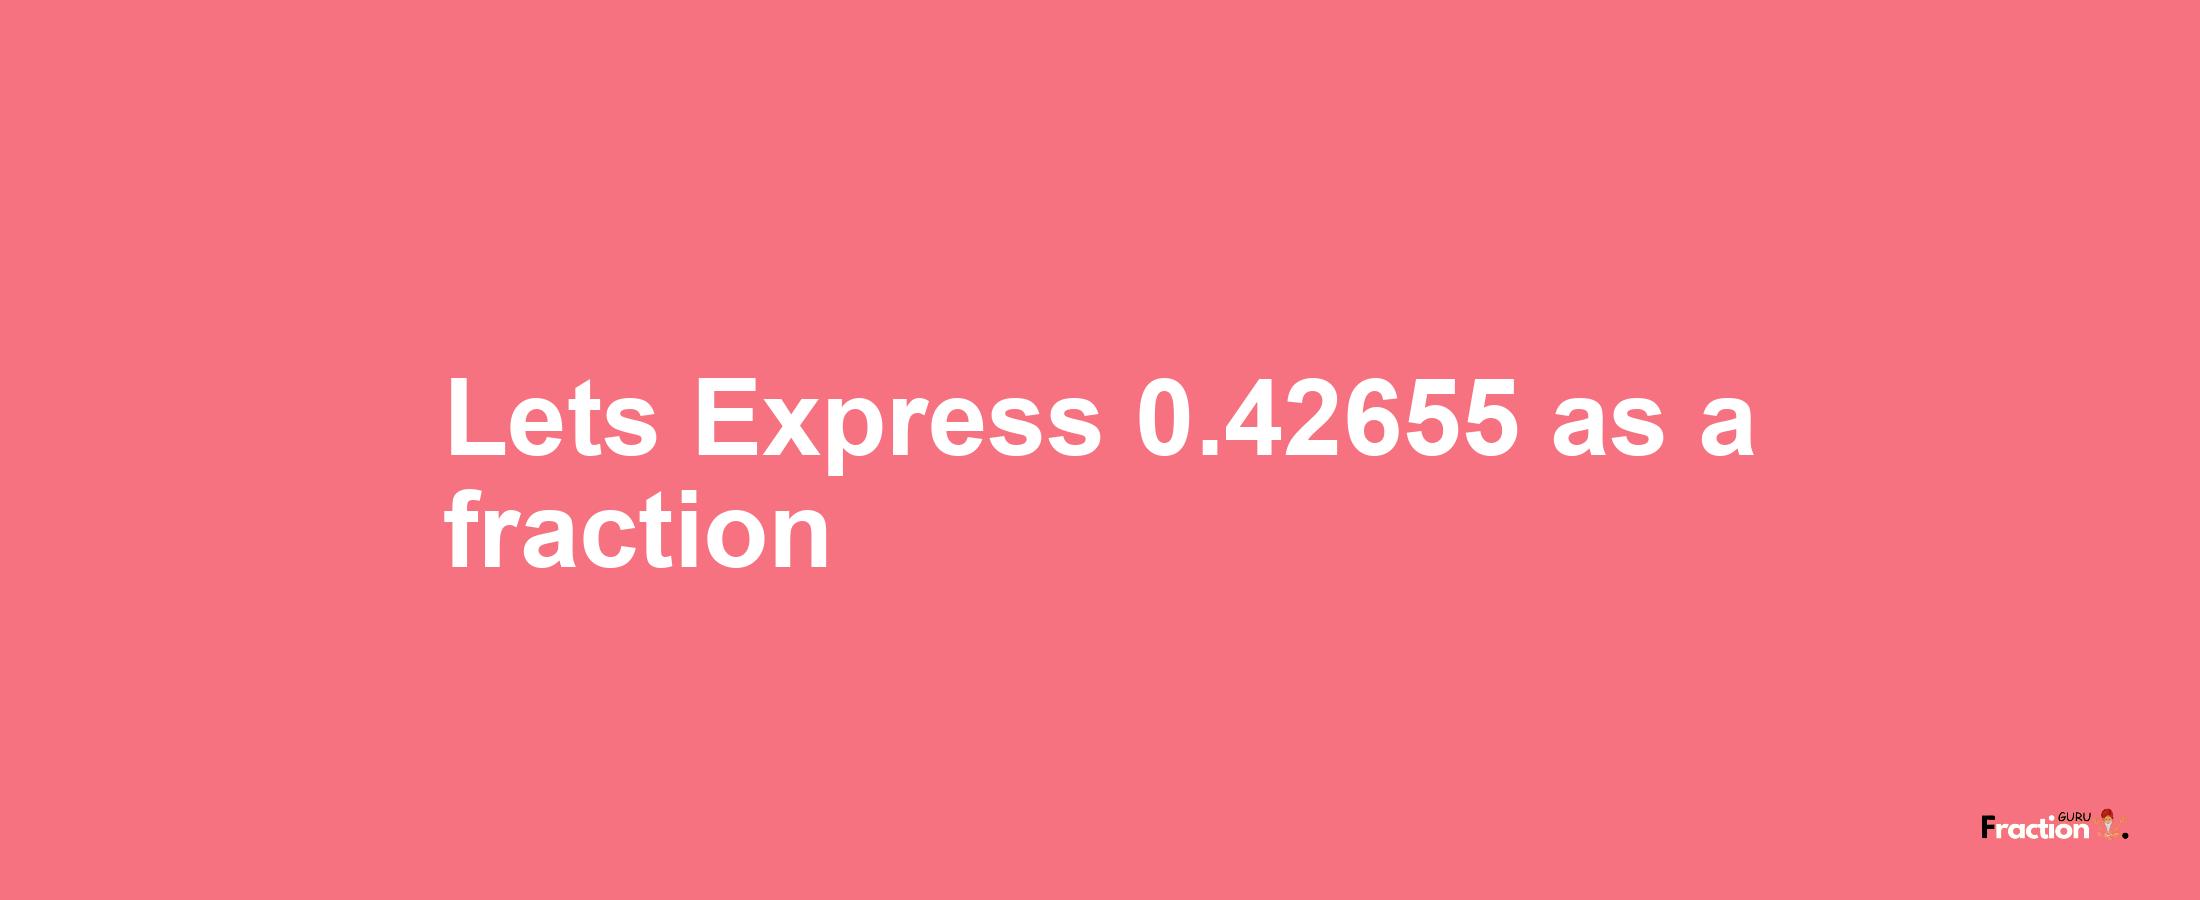 Lets Express 0.42655 as afraction